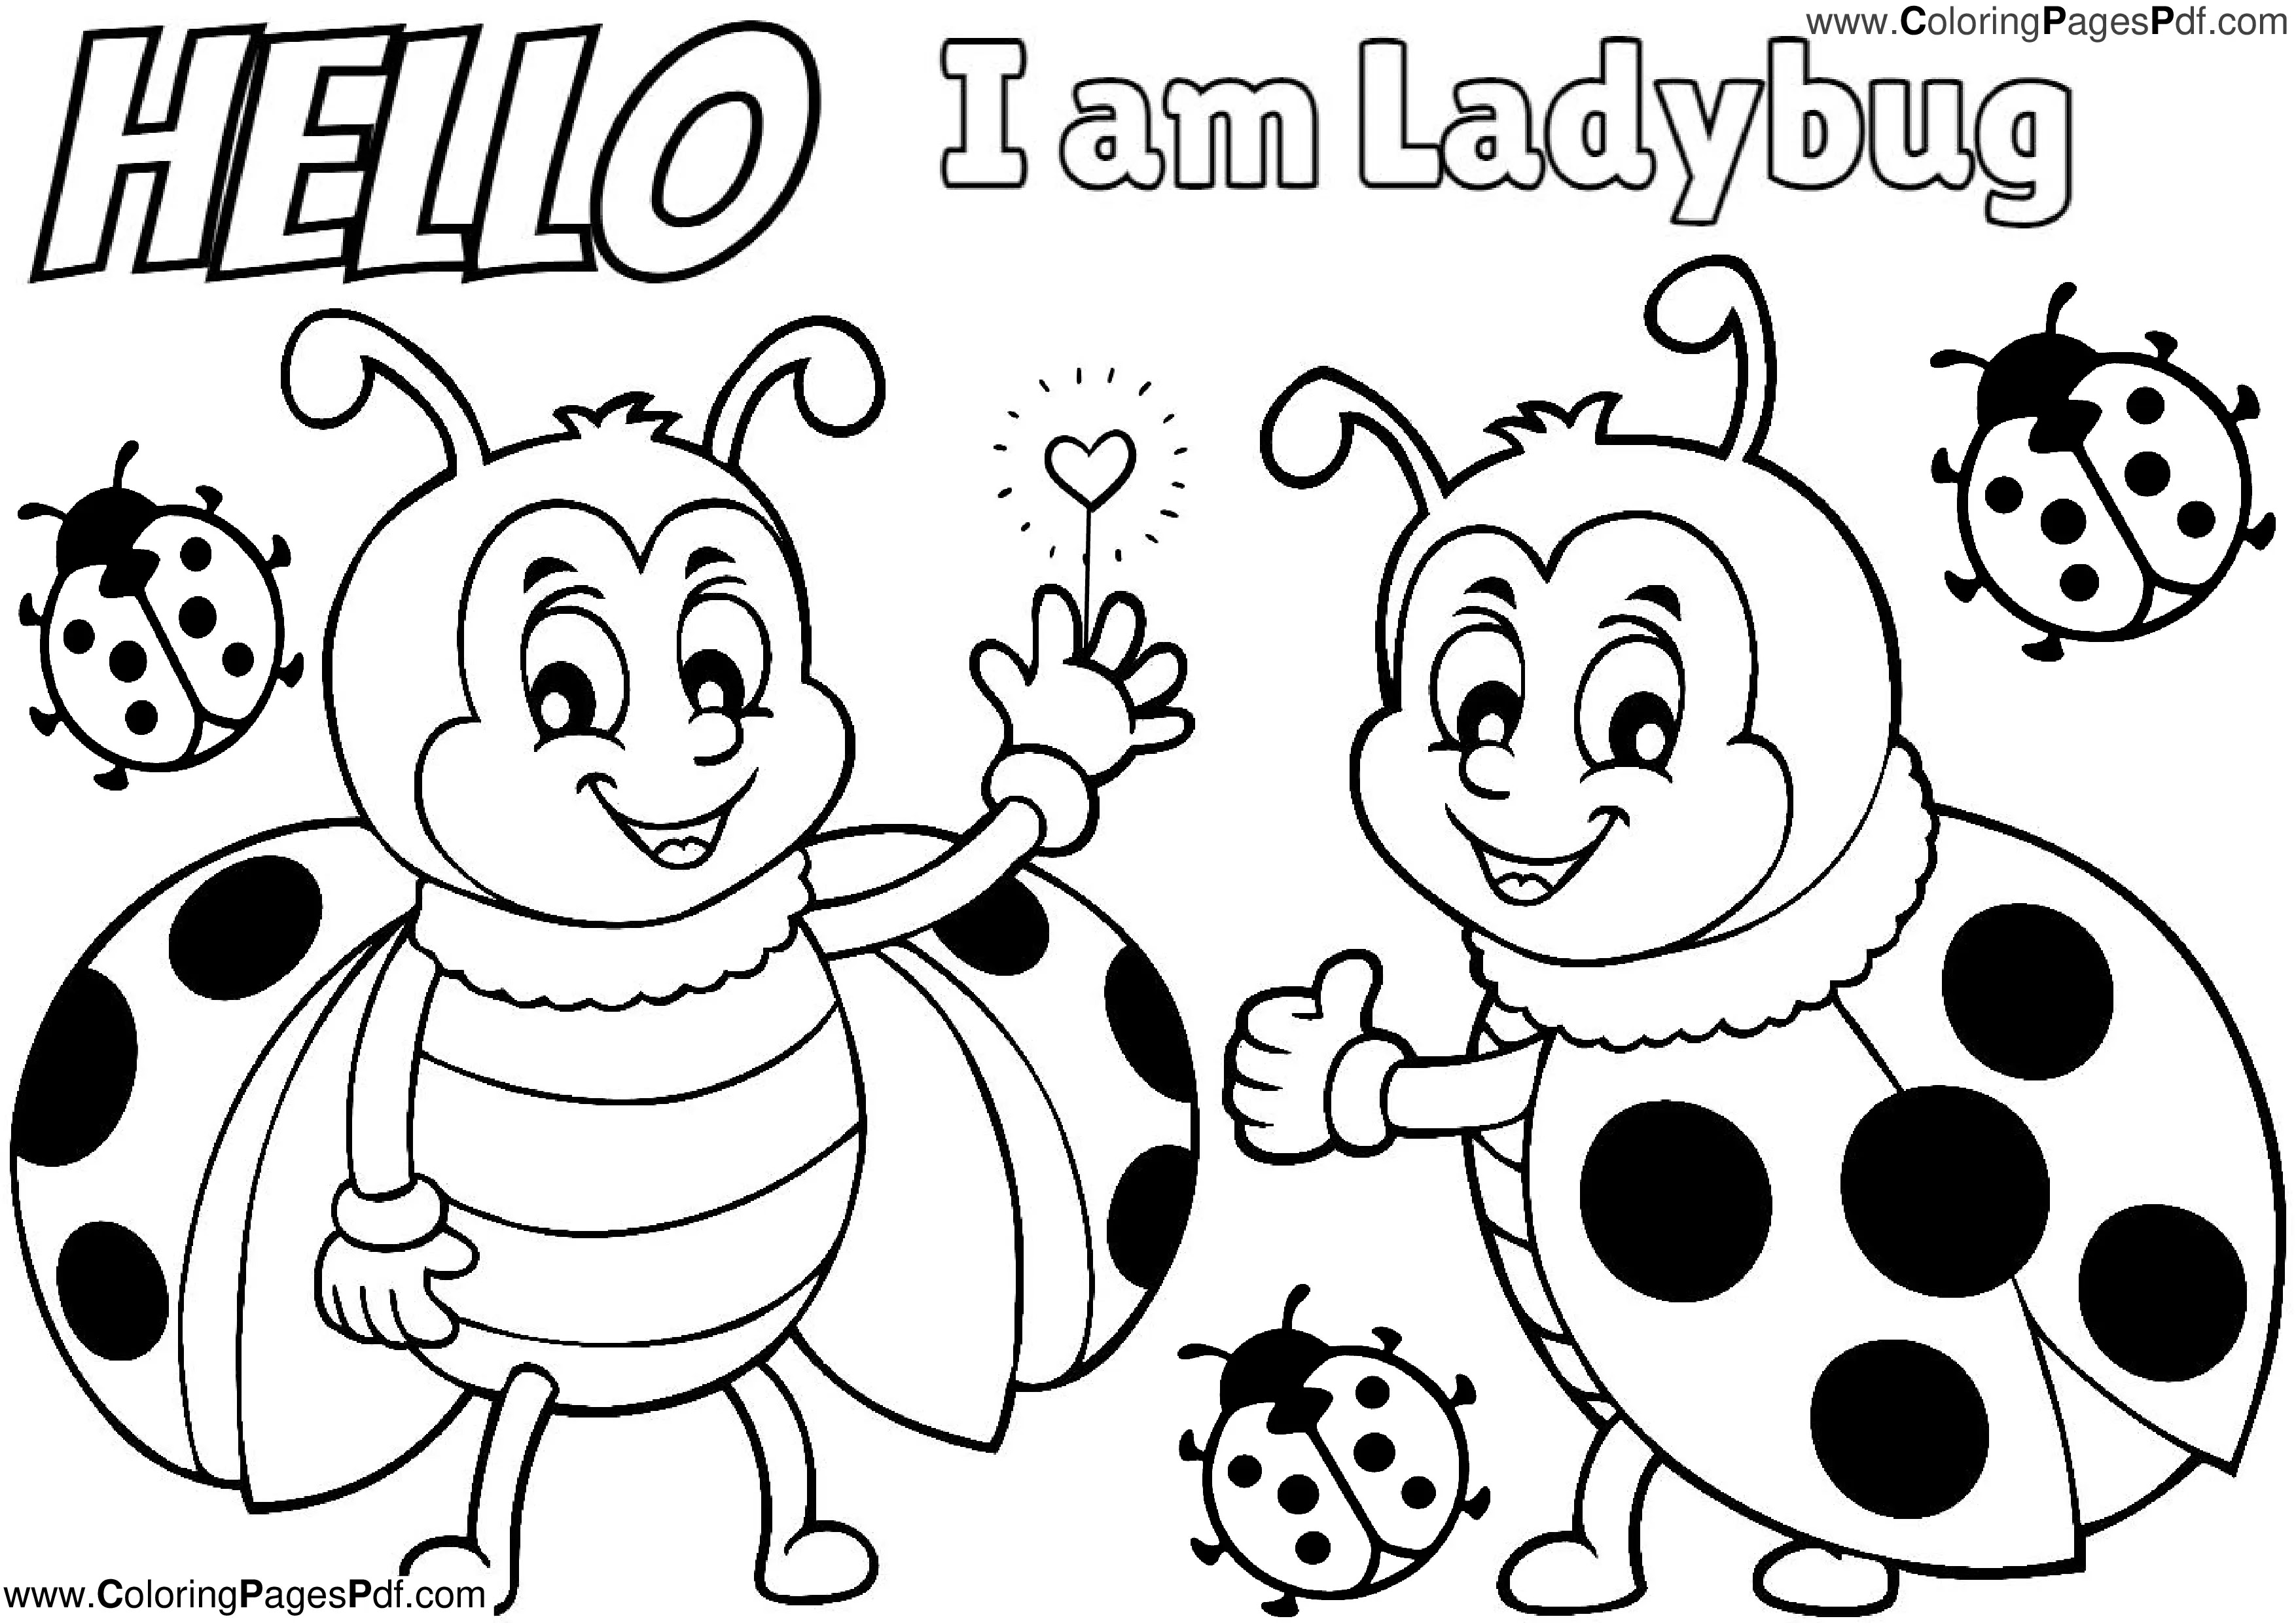 Ladybug coloring pages for preschoolers